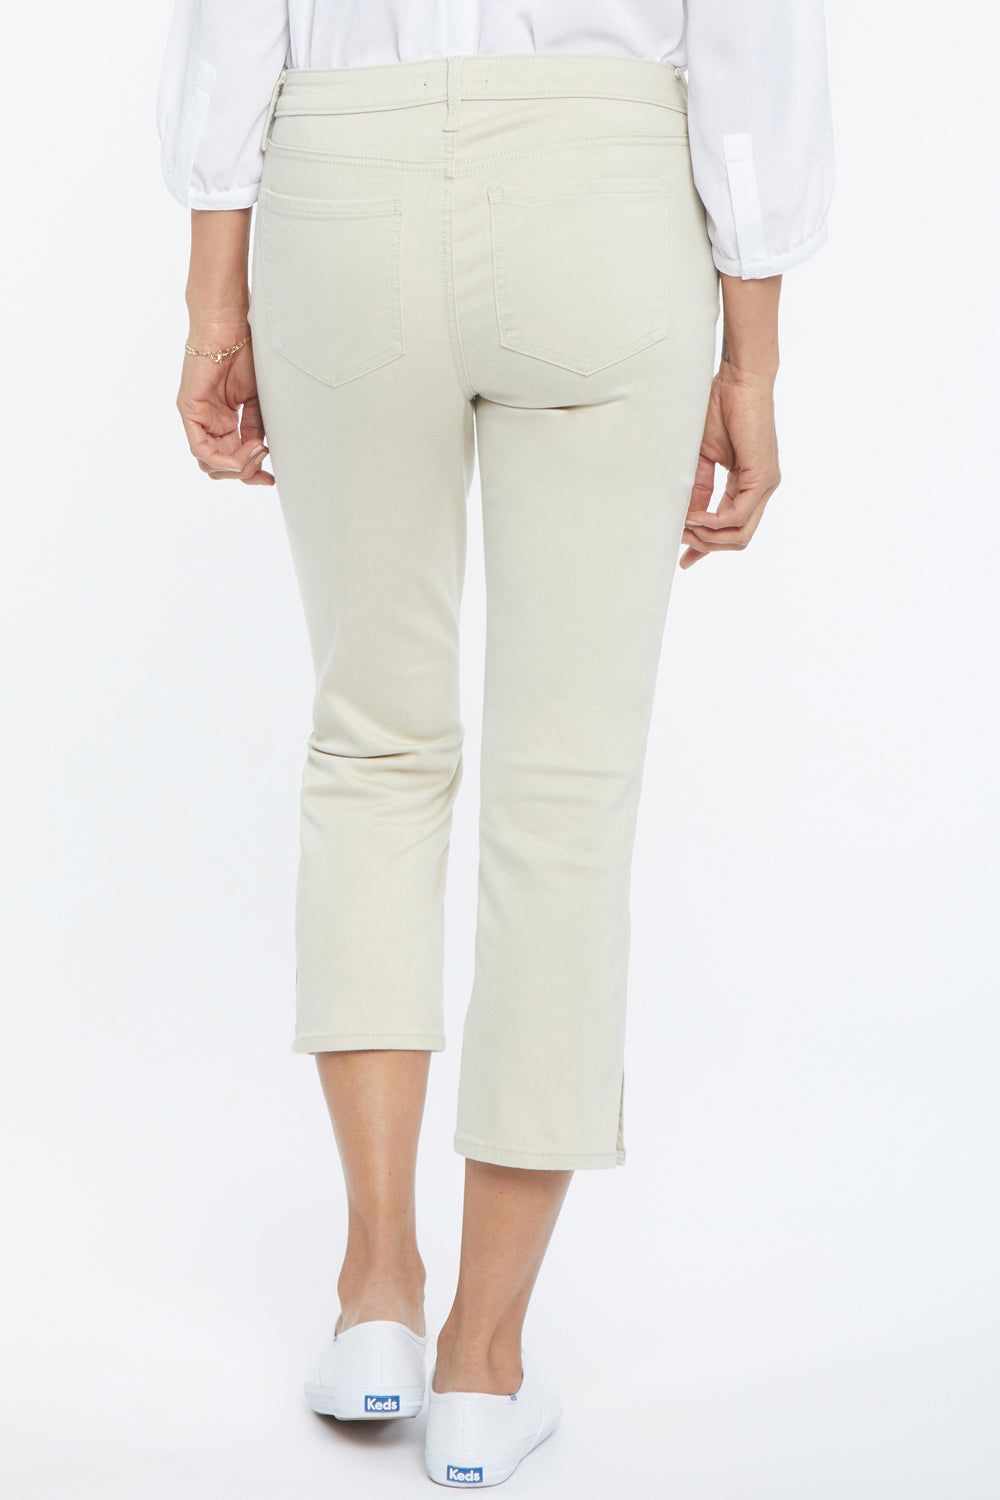 NYDJ Chloe Capri Jeans With Side Slits - Feather